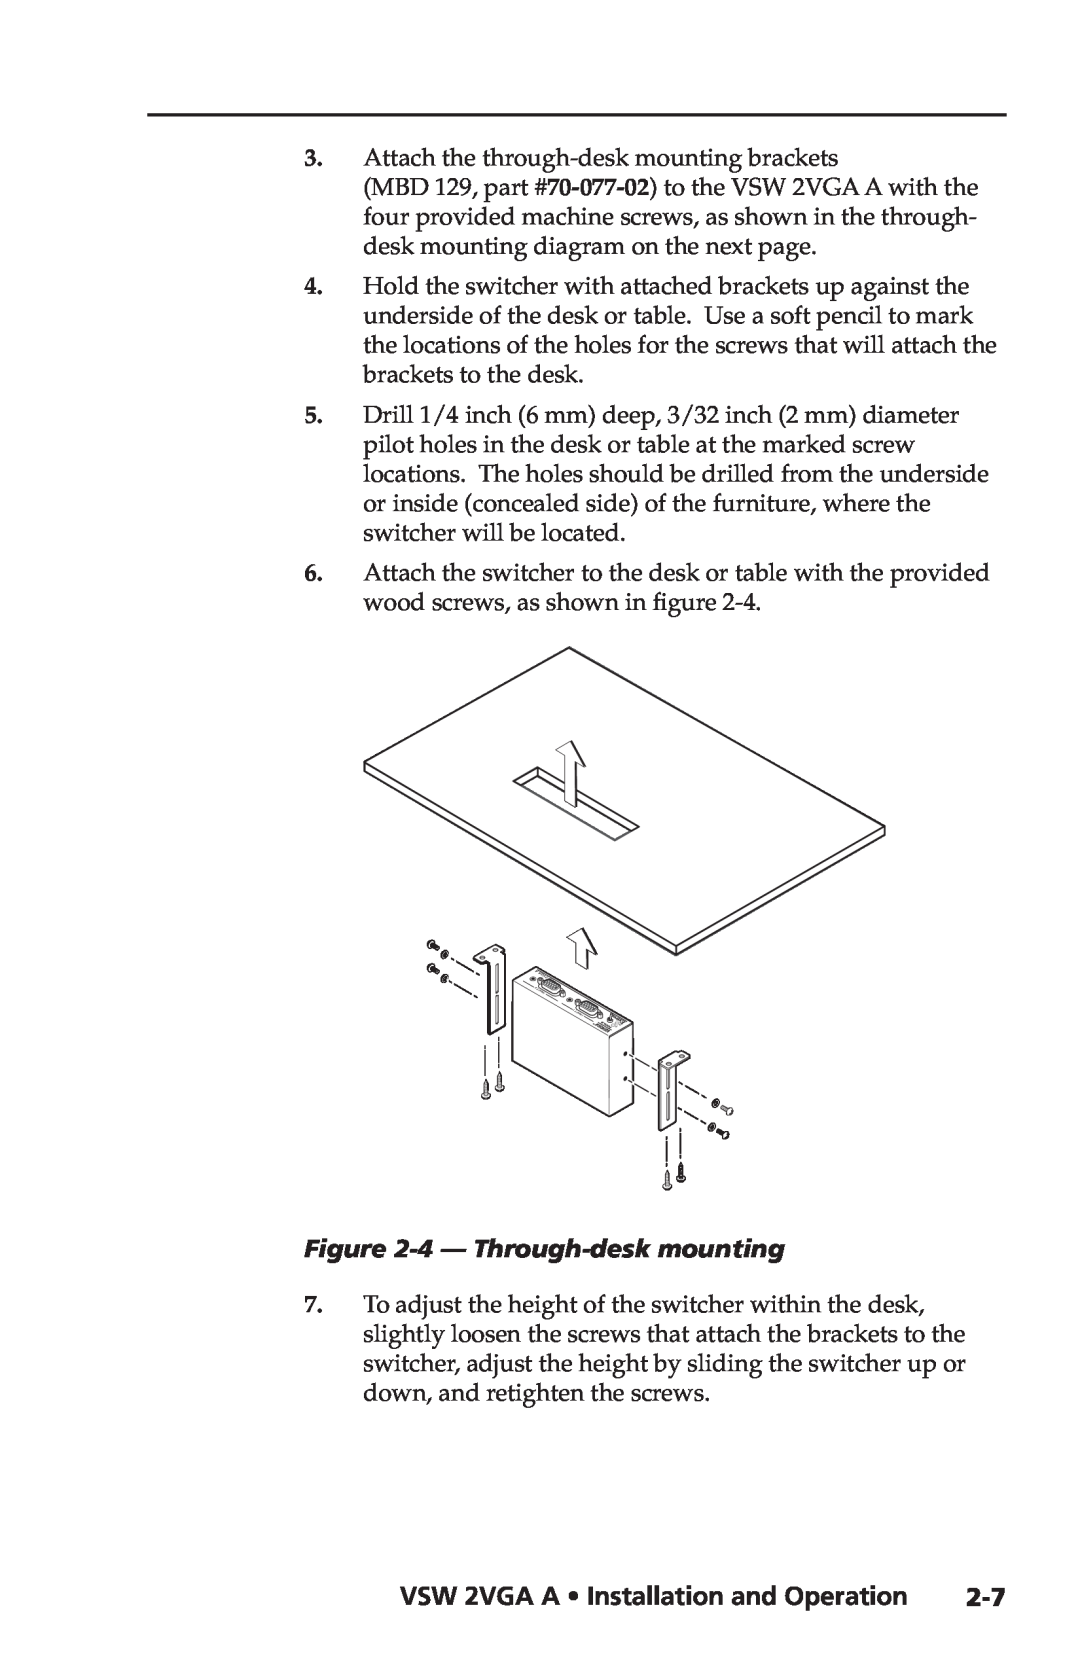 Extron electronic user manual 4 - Through-desk mounting, VSW 2VGA A Installation and Operation 